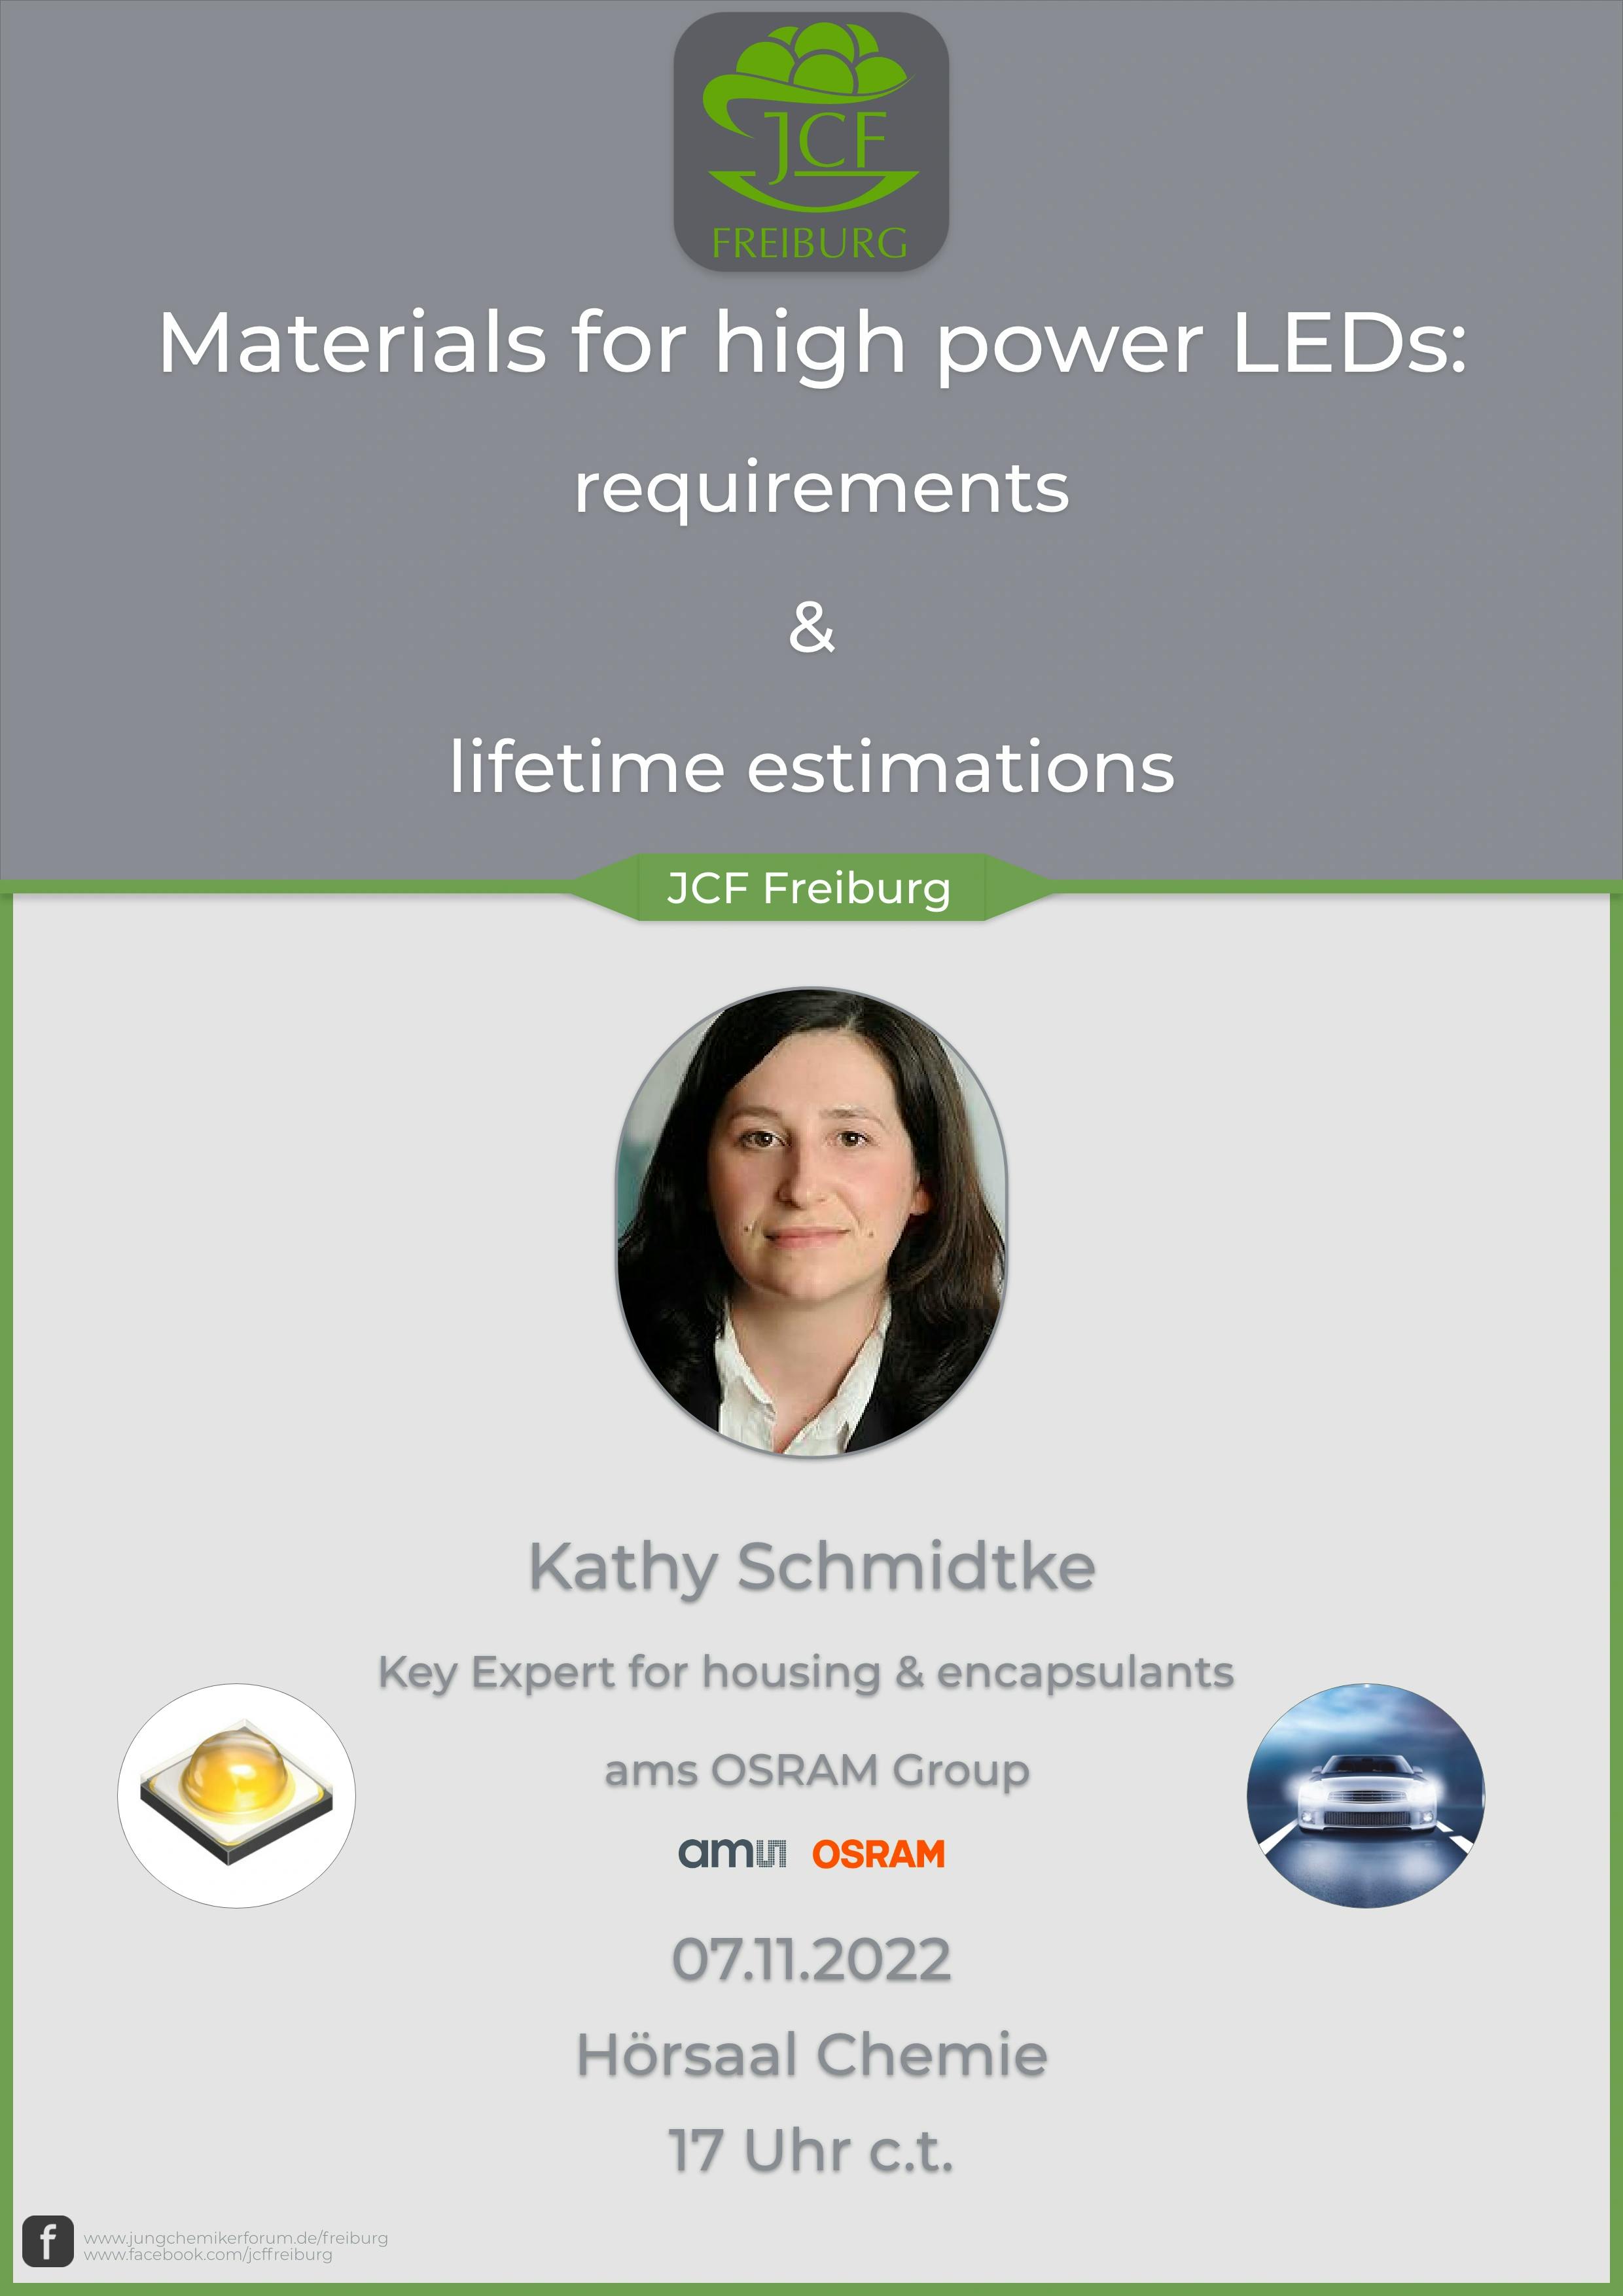 Materials for high power LEDs: Requirements & lifetime estimations